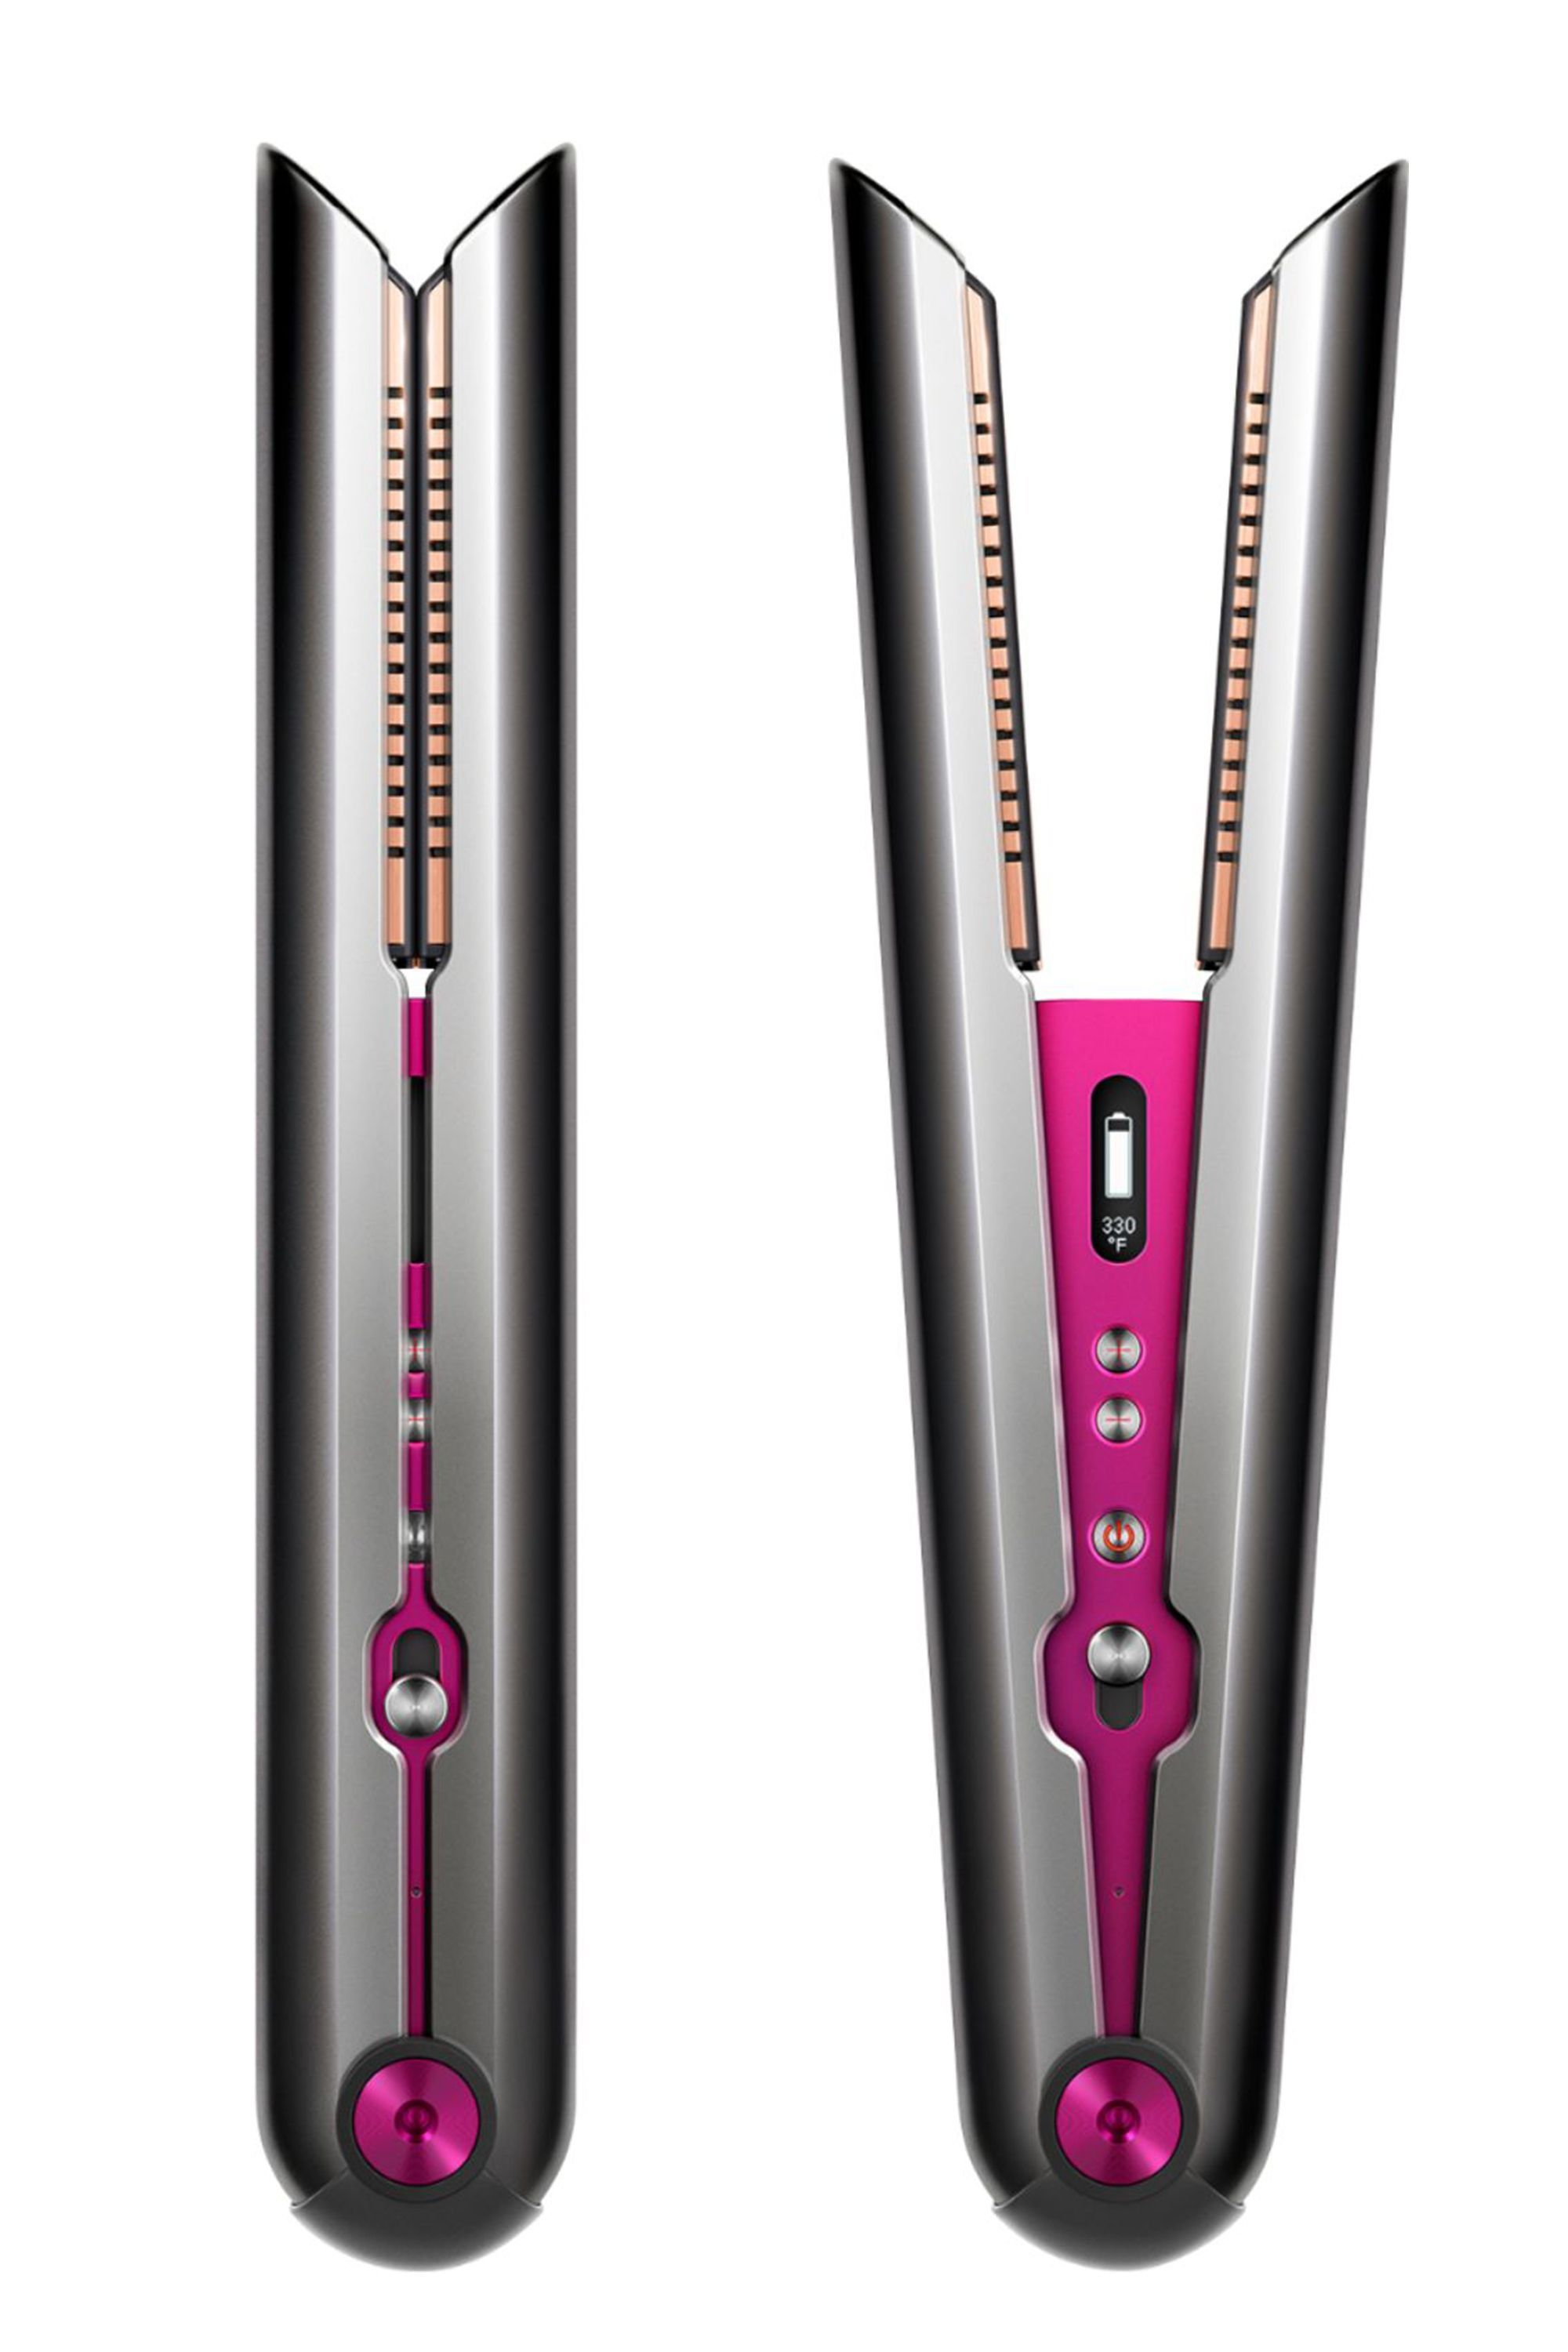 best rated flat iron